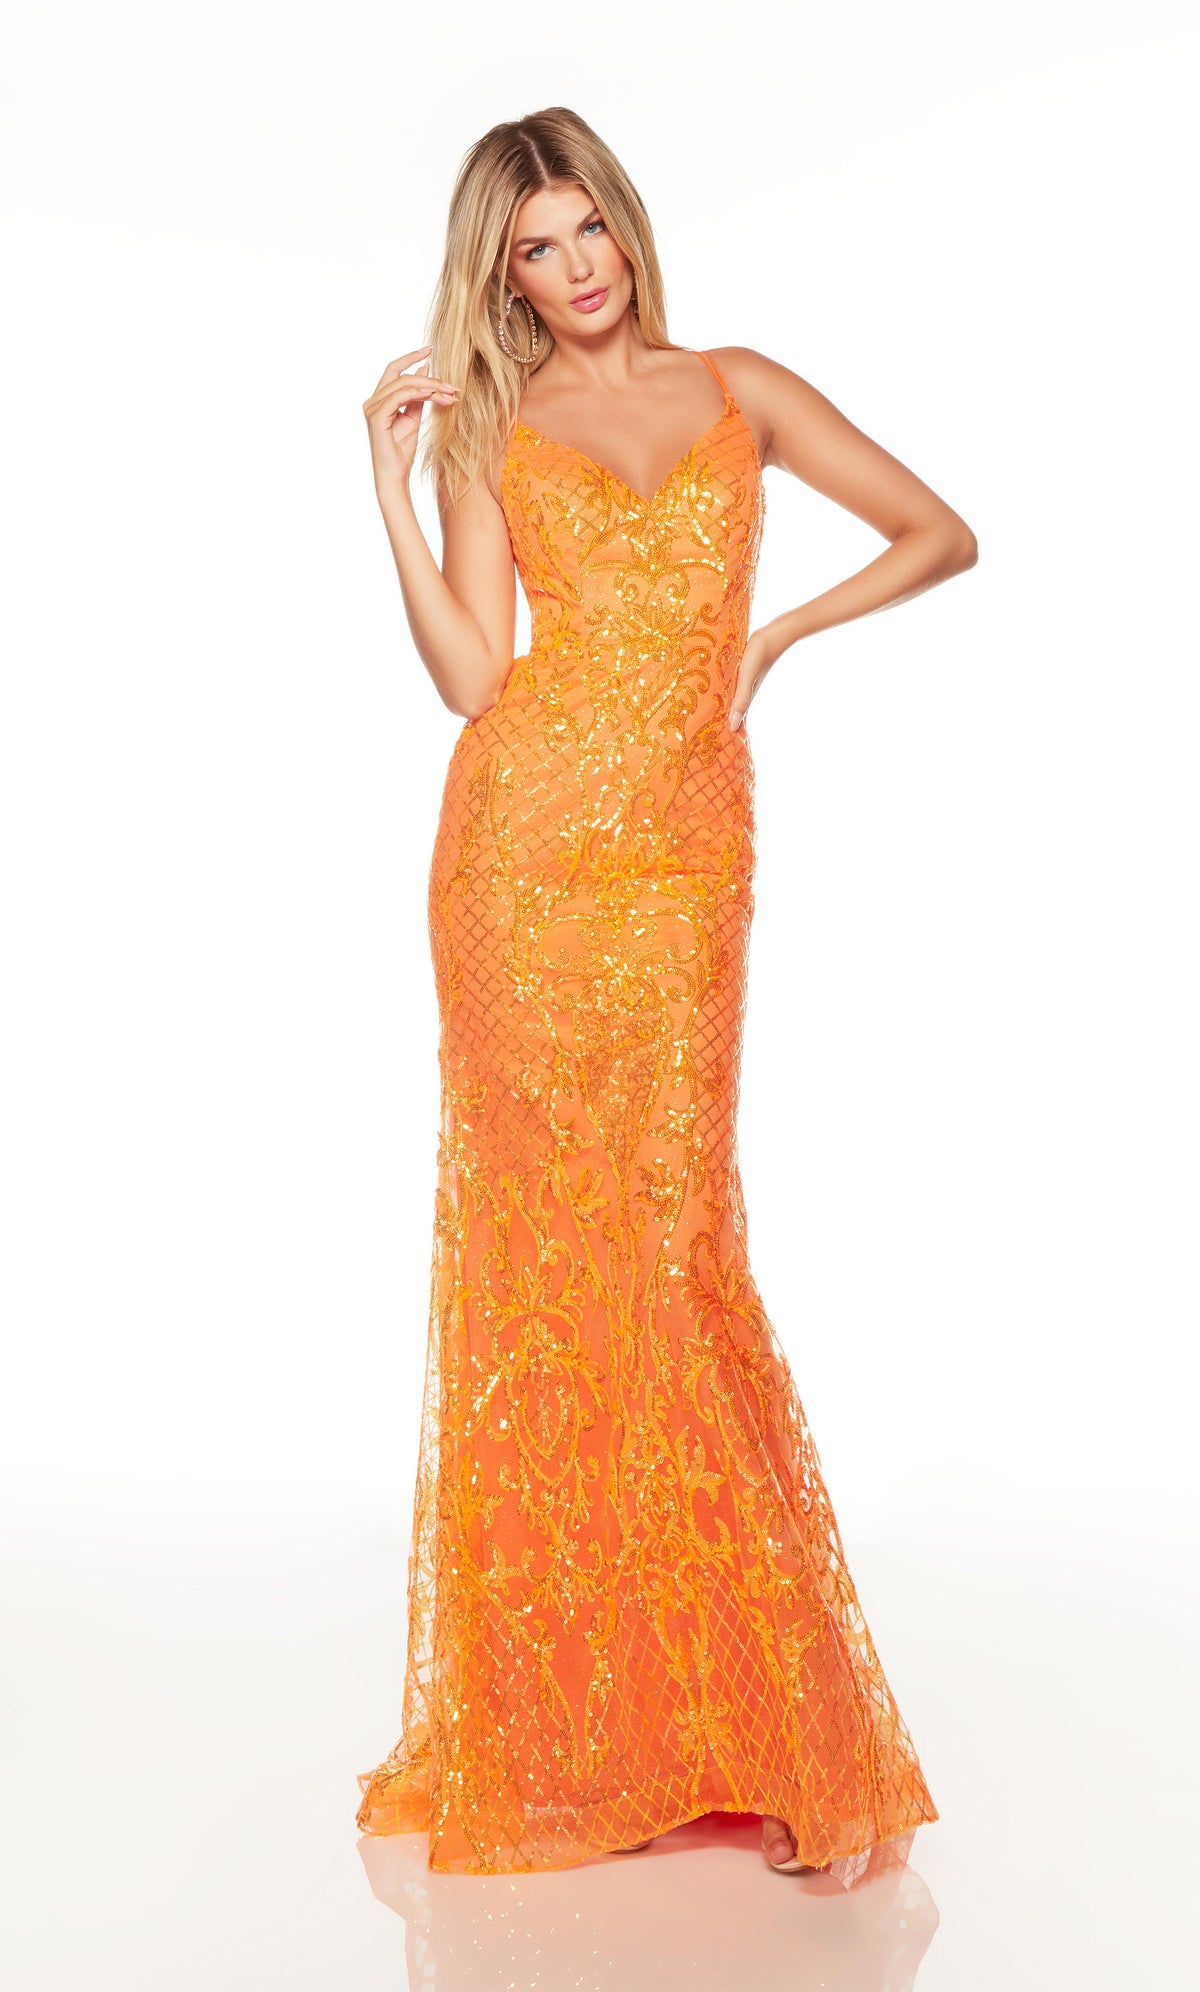 Sparkly fit and flare orange prom dress with a V neckline. COLOR-SWATCH_61330__BRIGHT-ORANGE